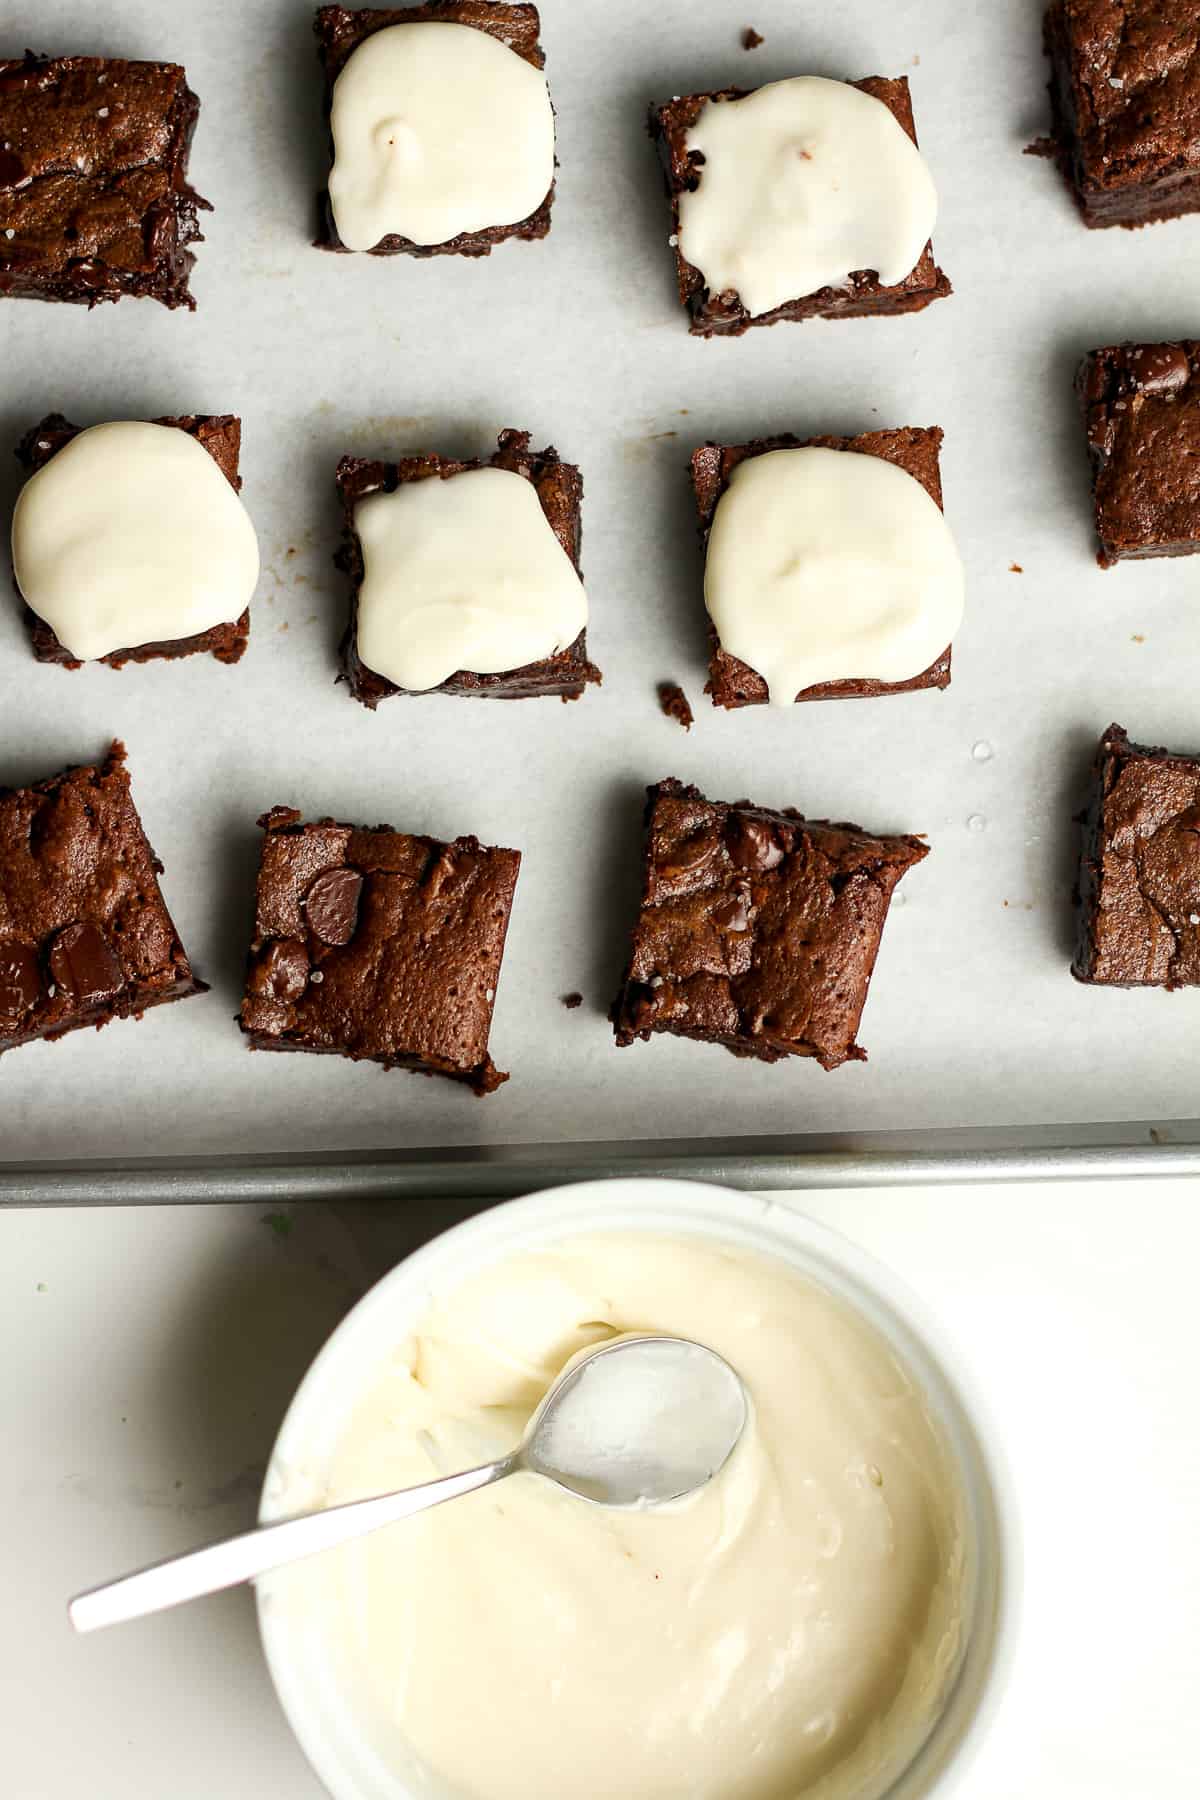 The brownie bites with some powdered sugar icing on top.